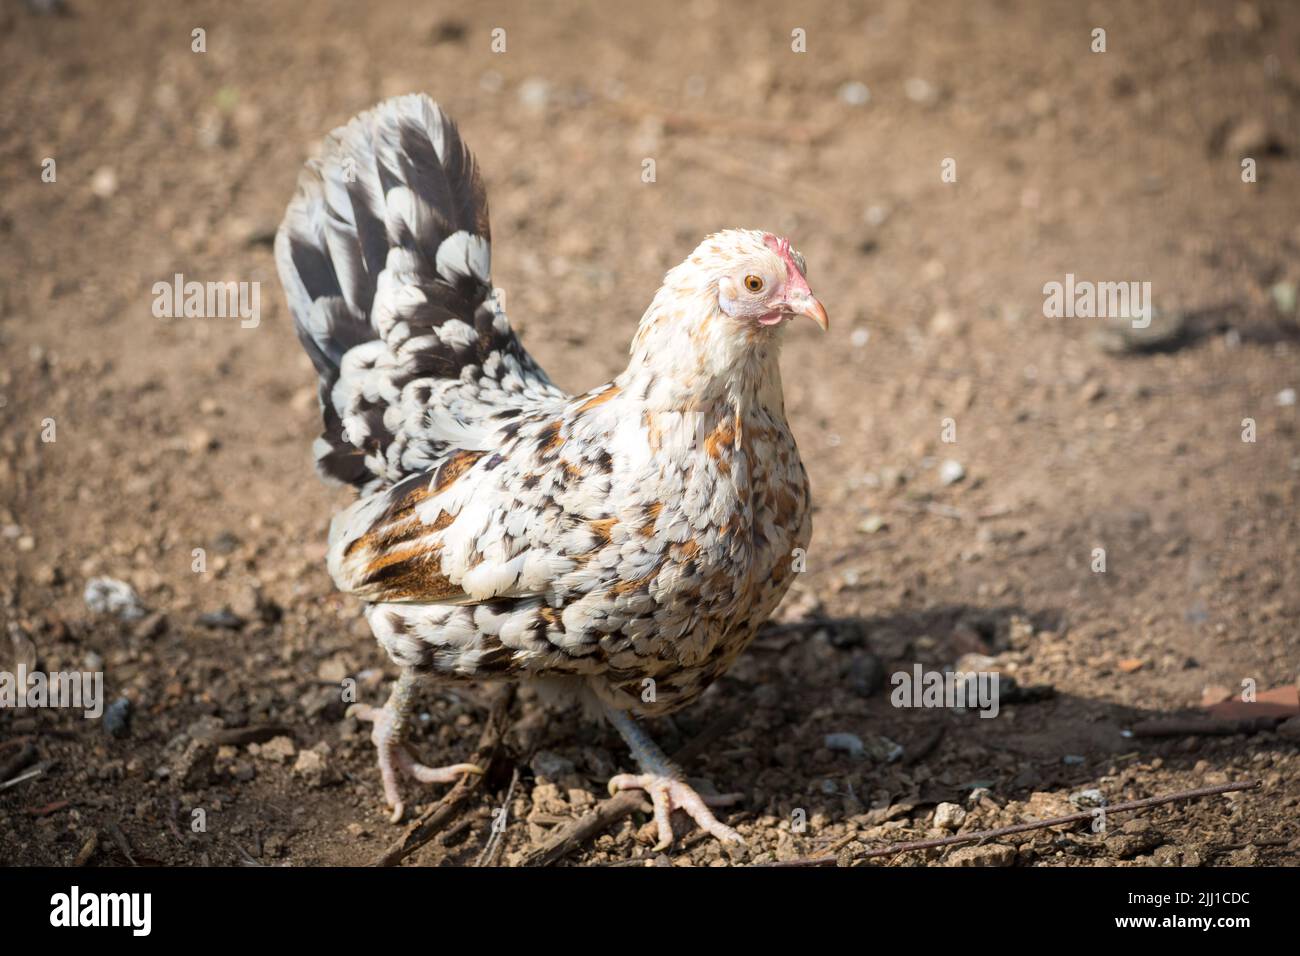 Stoapiperl hen. The Stoapiperl/ Steinhendl is an endangered Austrian chicken breed Stock Photo